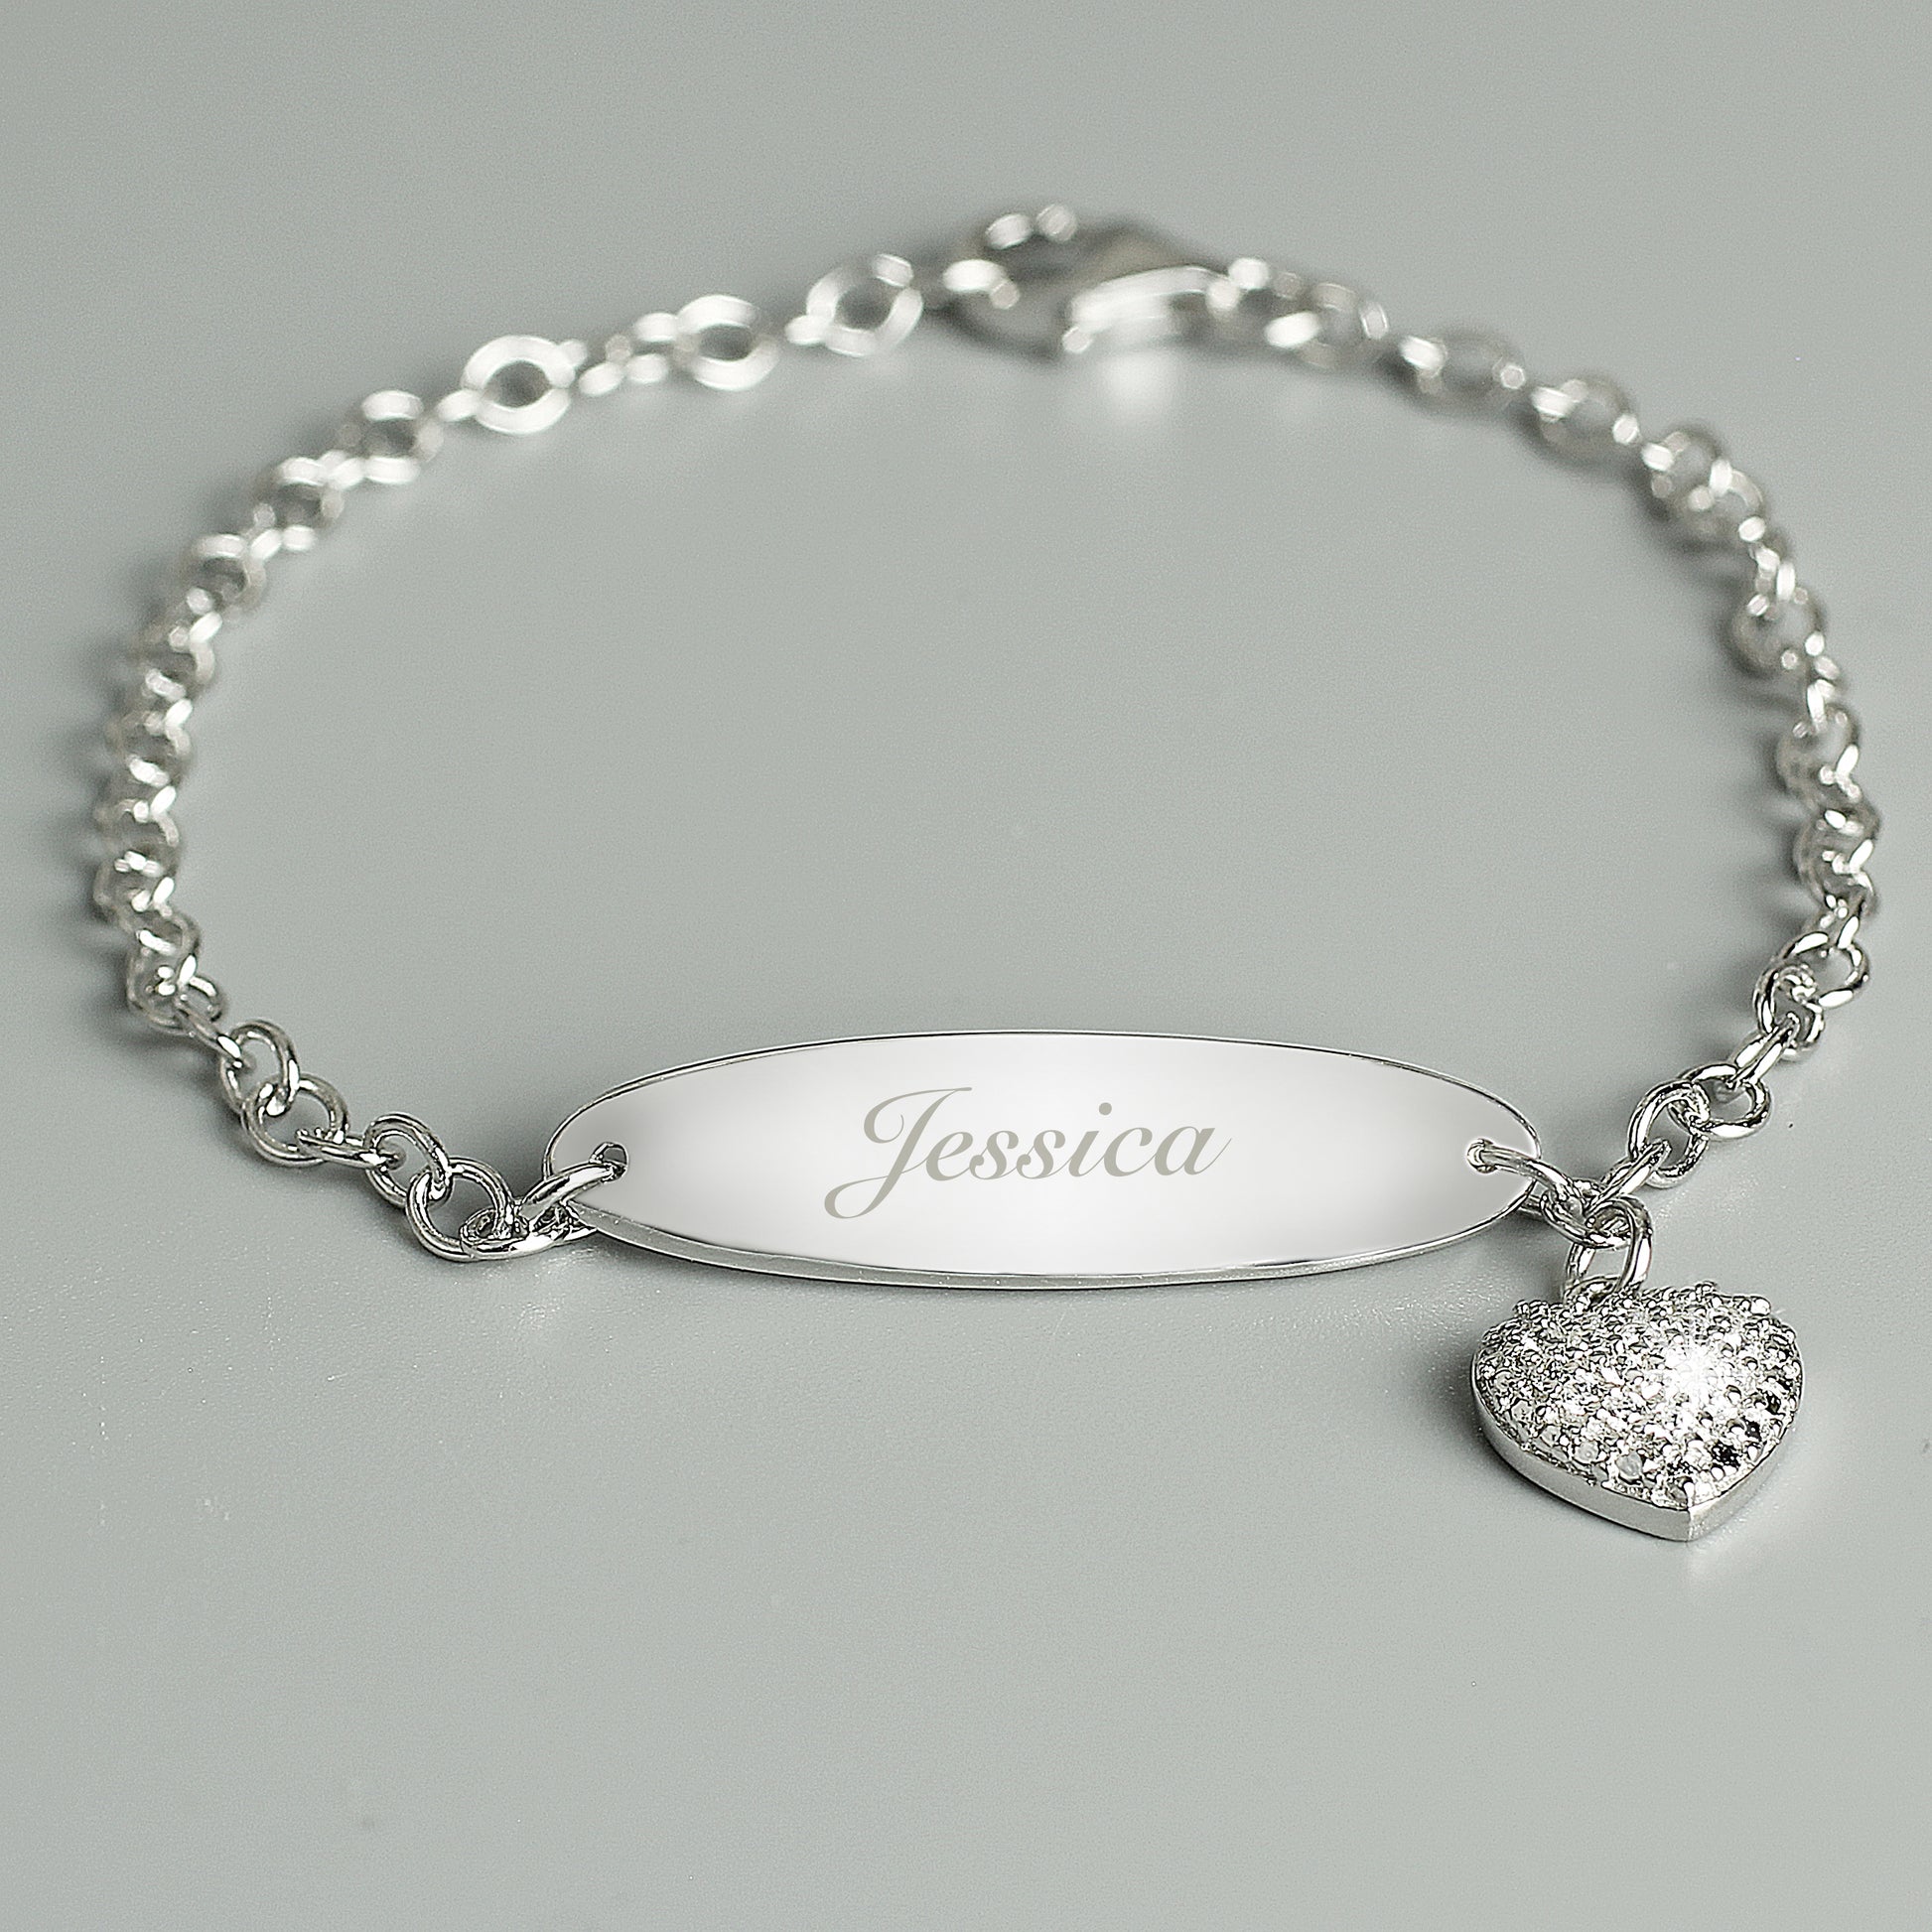 Personalised Child's Sterling Silver Bracelet by SommerSparkle